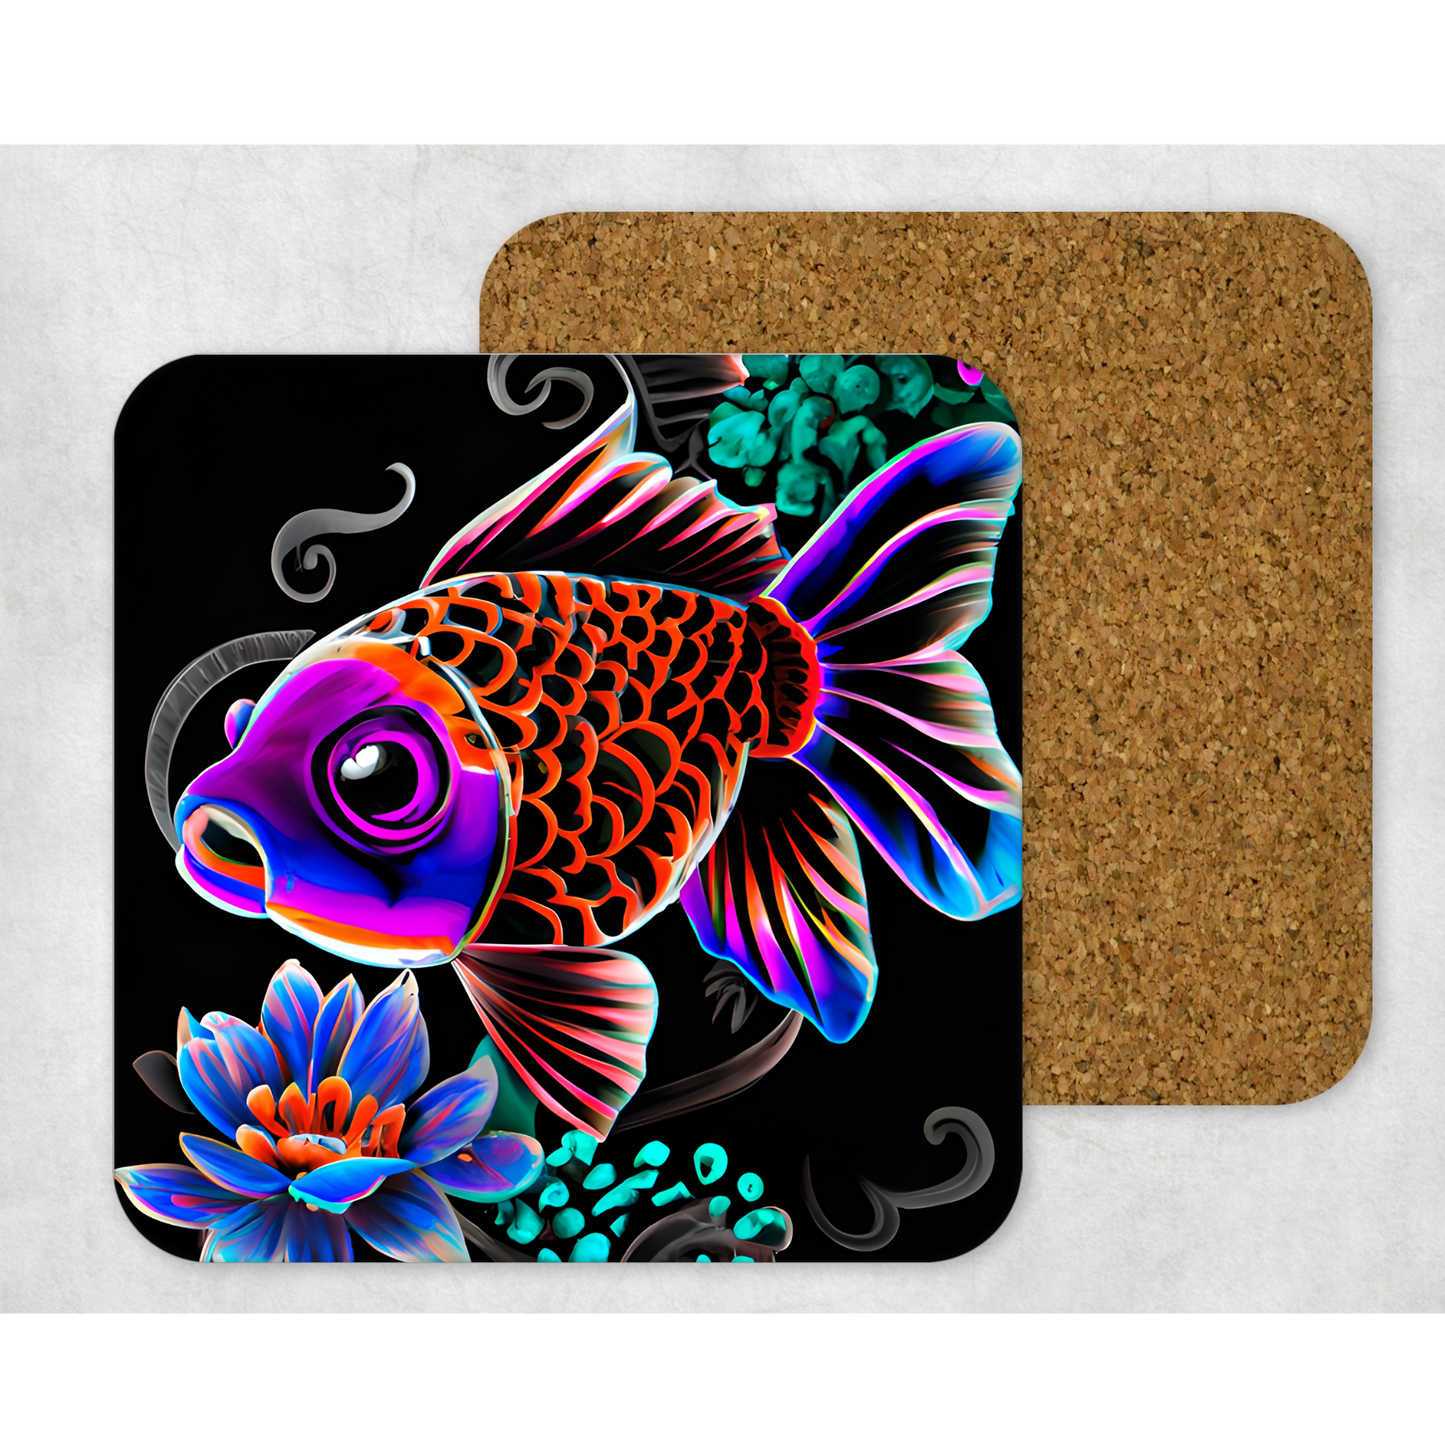 Beautifully Printed Colourful Fish wooden Coasters for Stylish Home Décor